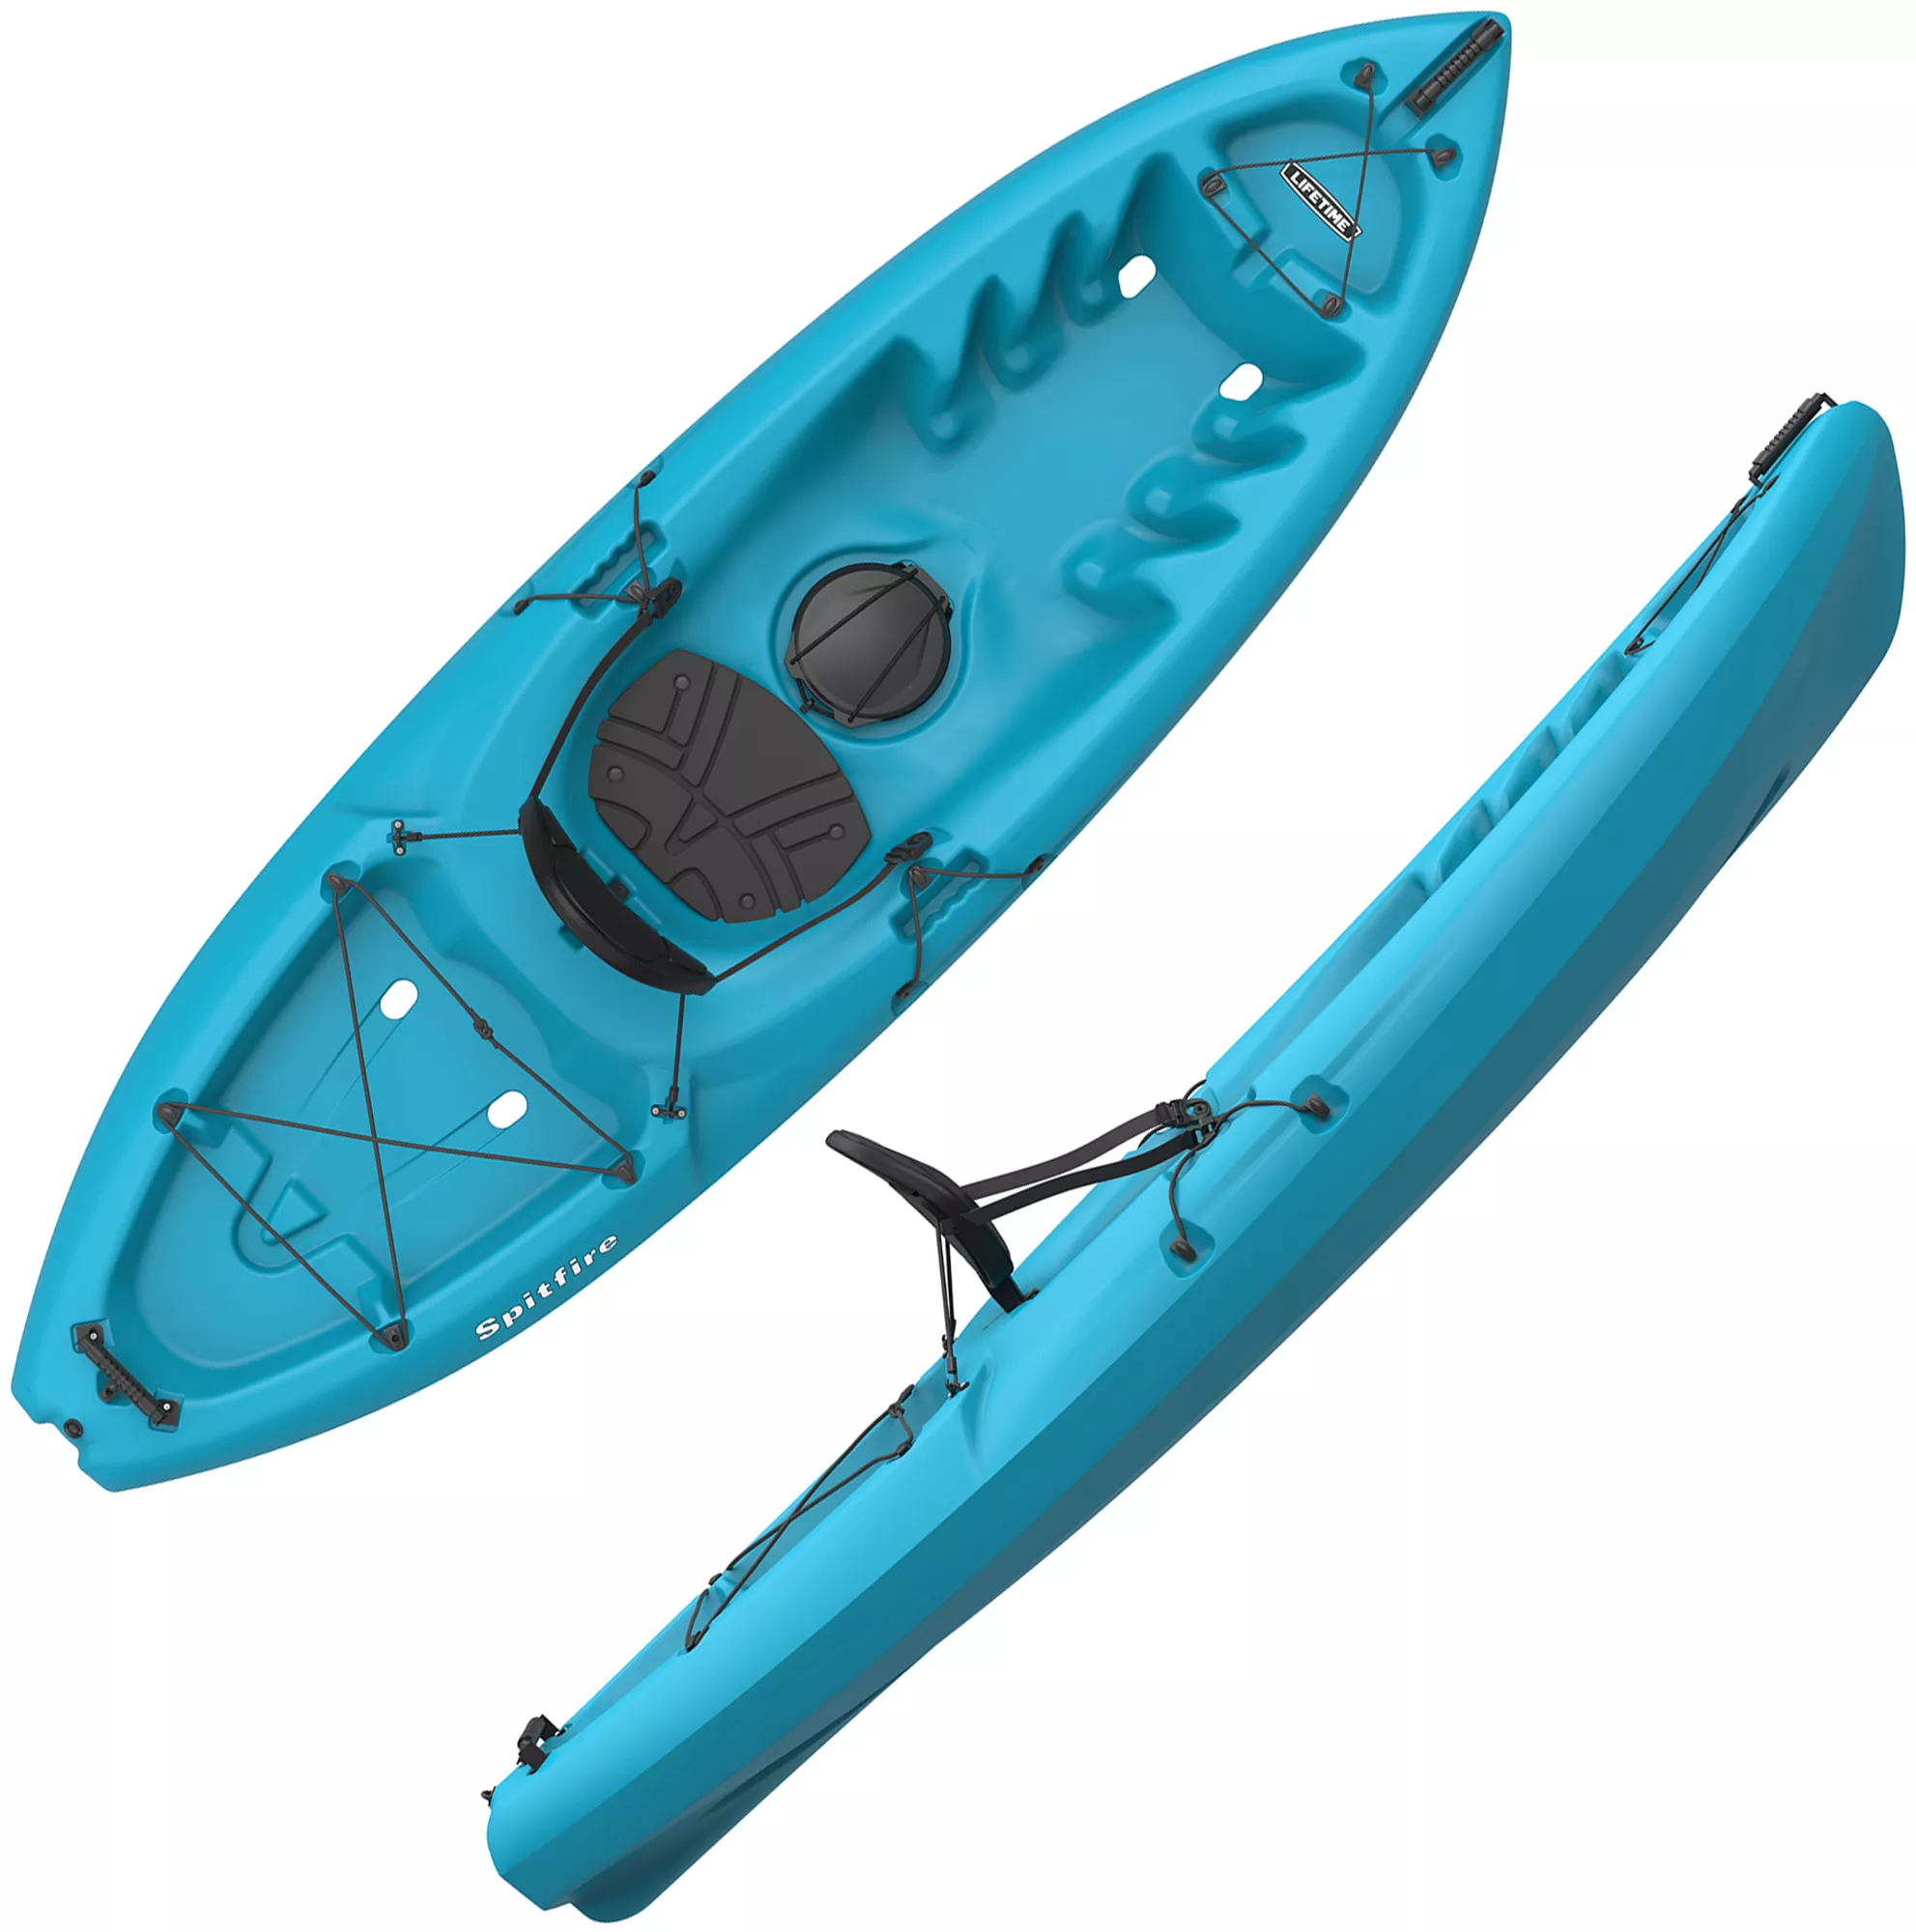 The 10 Best Kayak Fishing Accessories That Every Angler Must Own